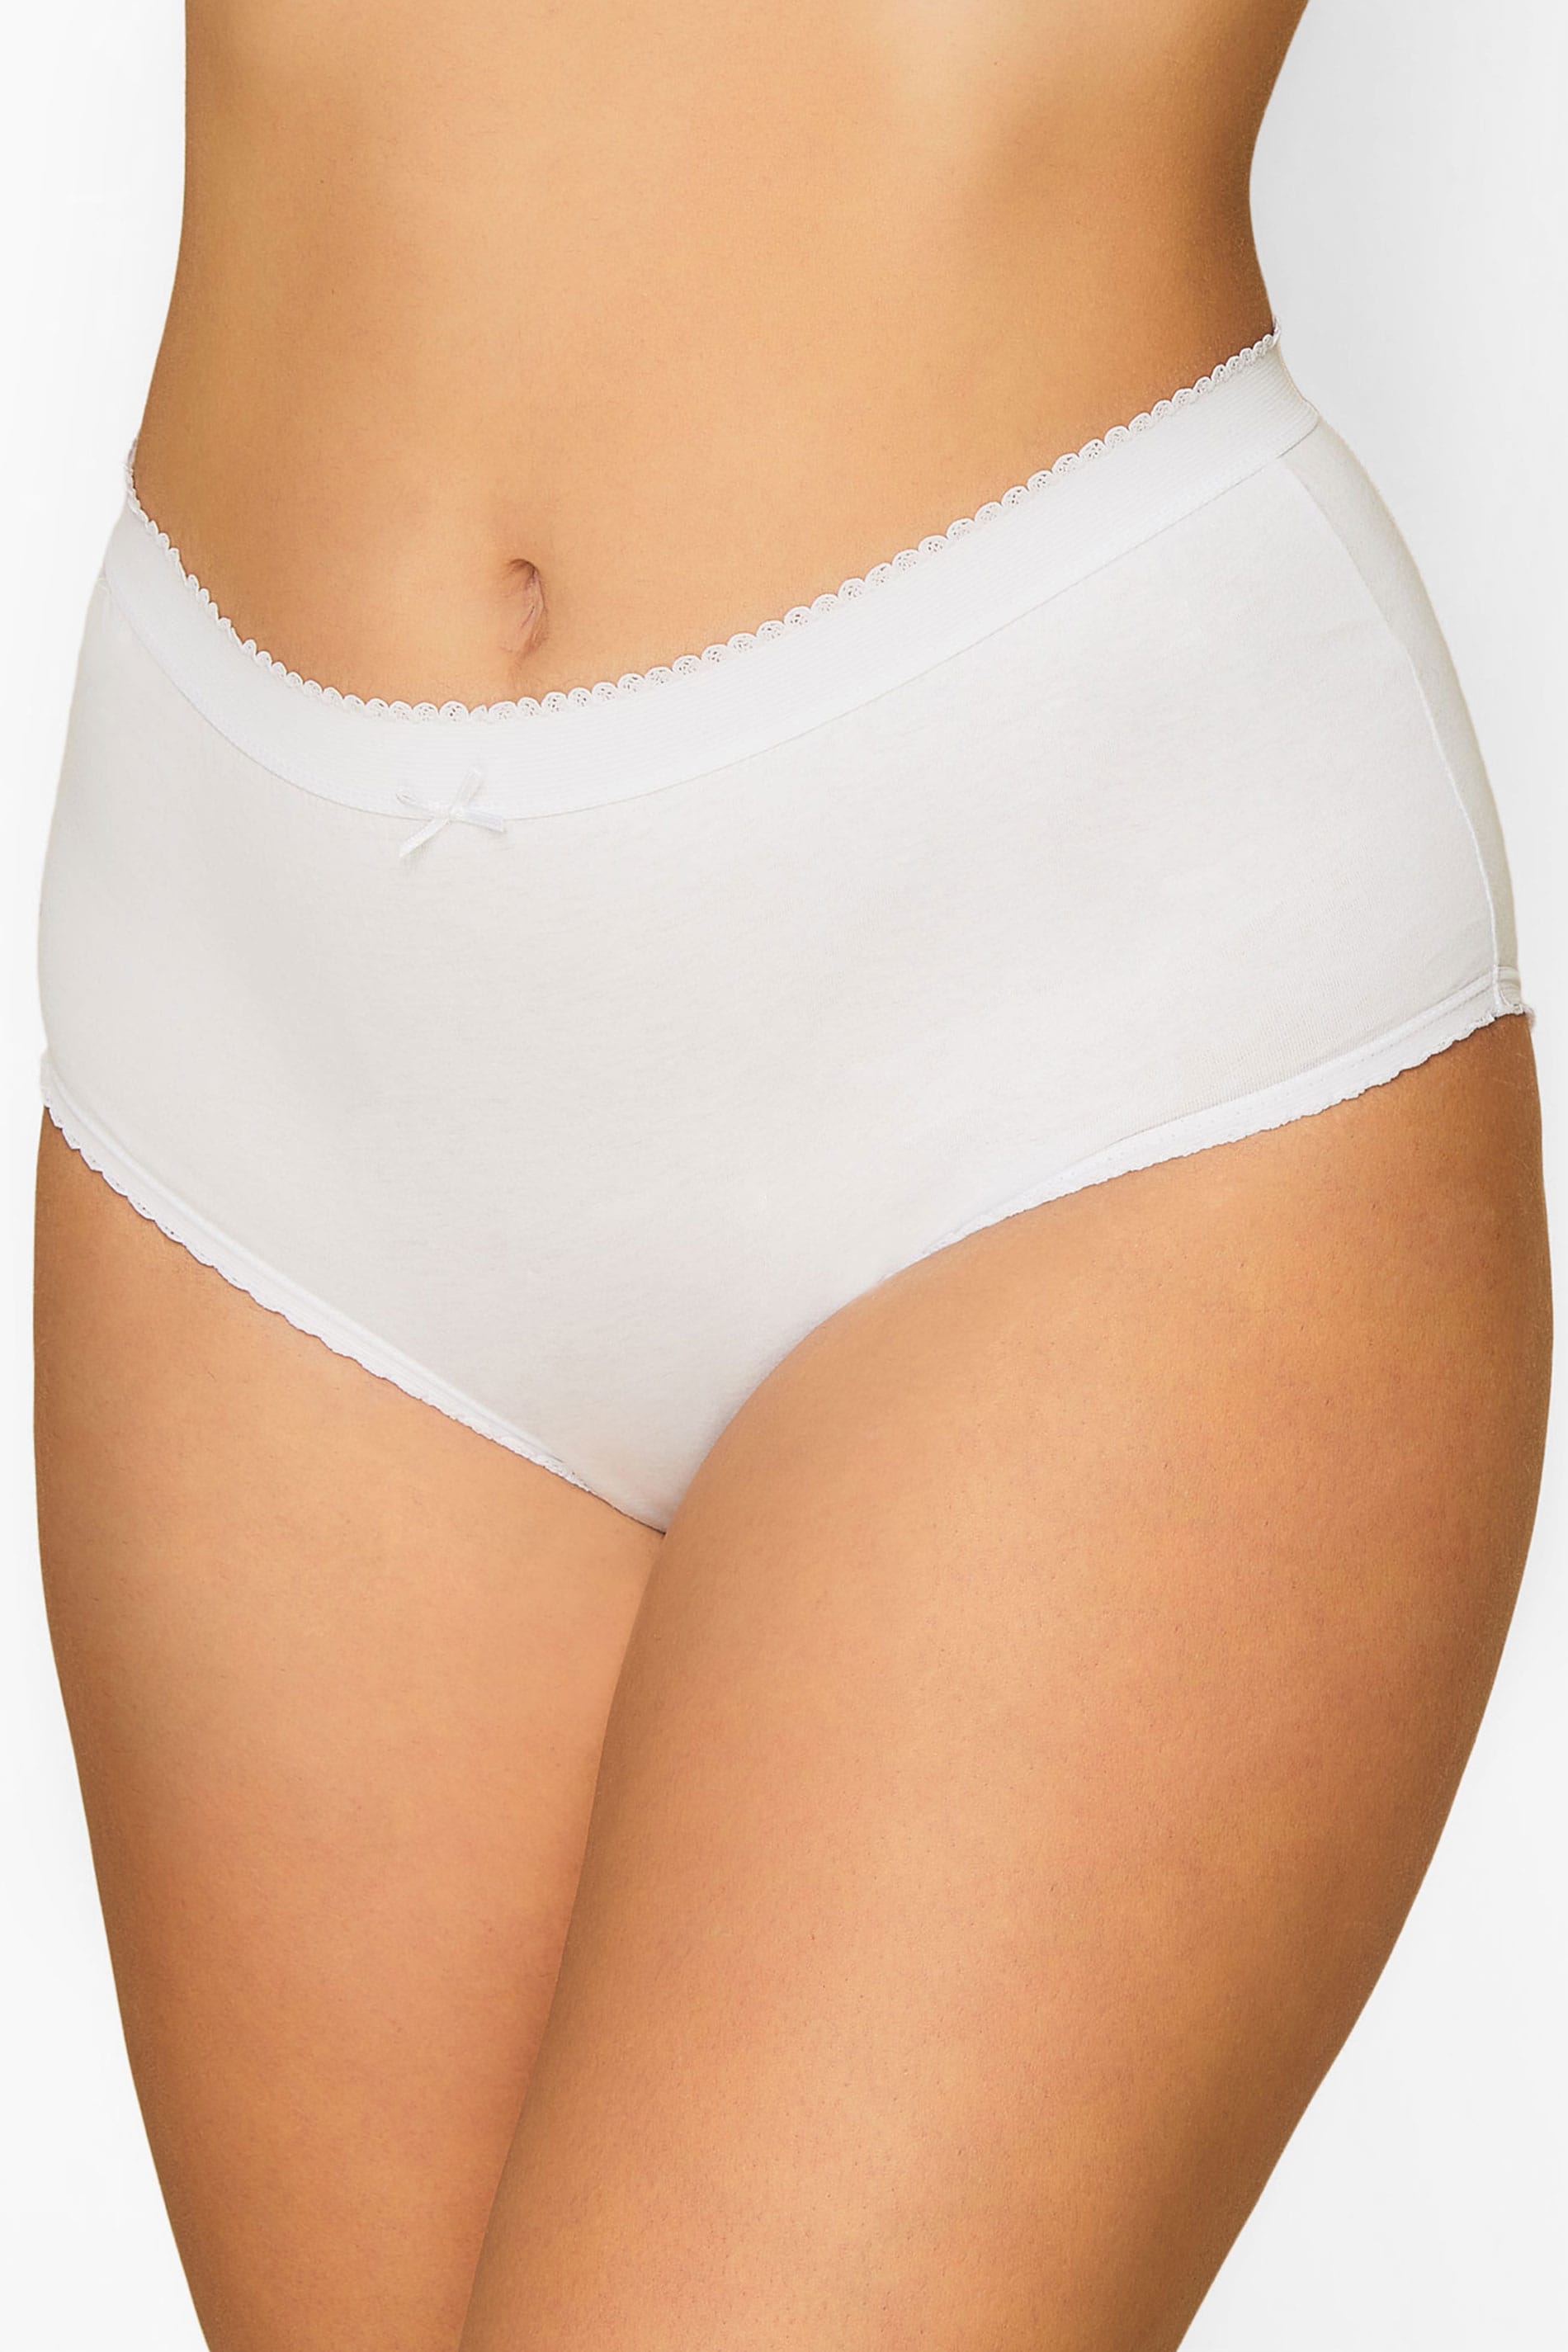 5 PACK Curve White Cotton High Waisted Full Briefs 1